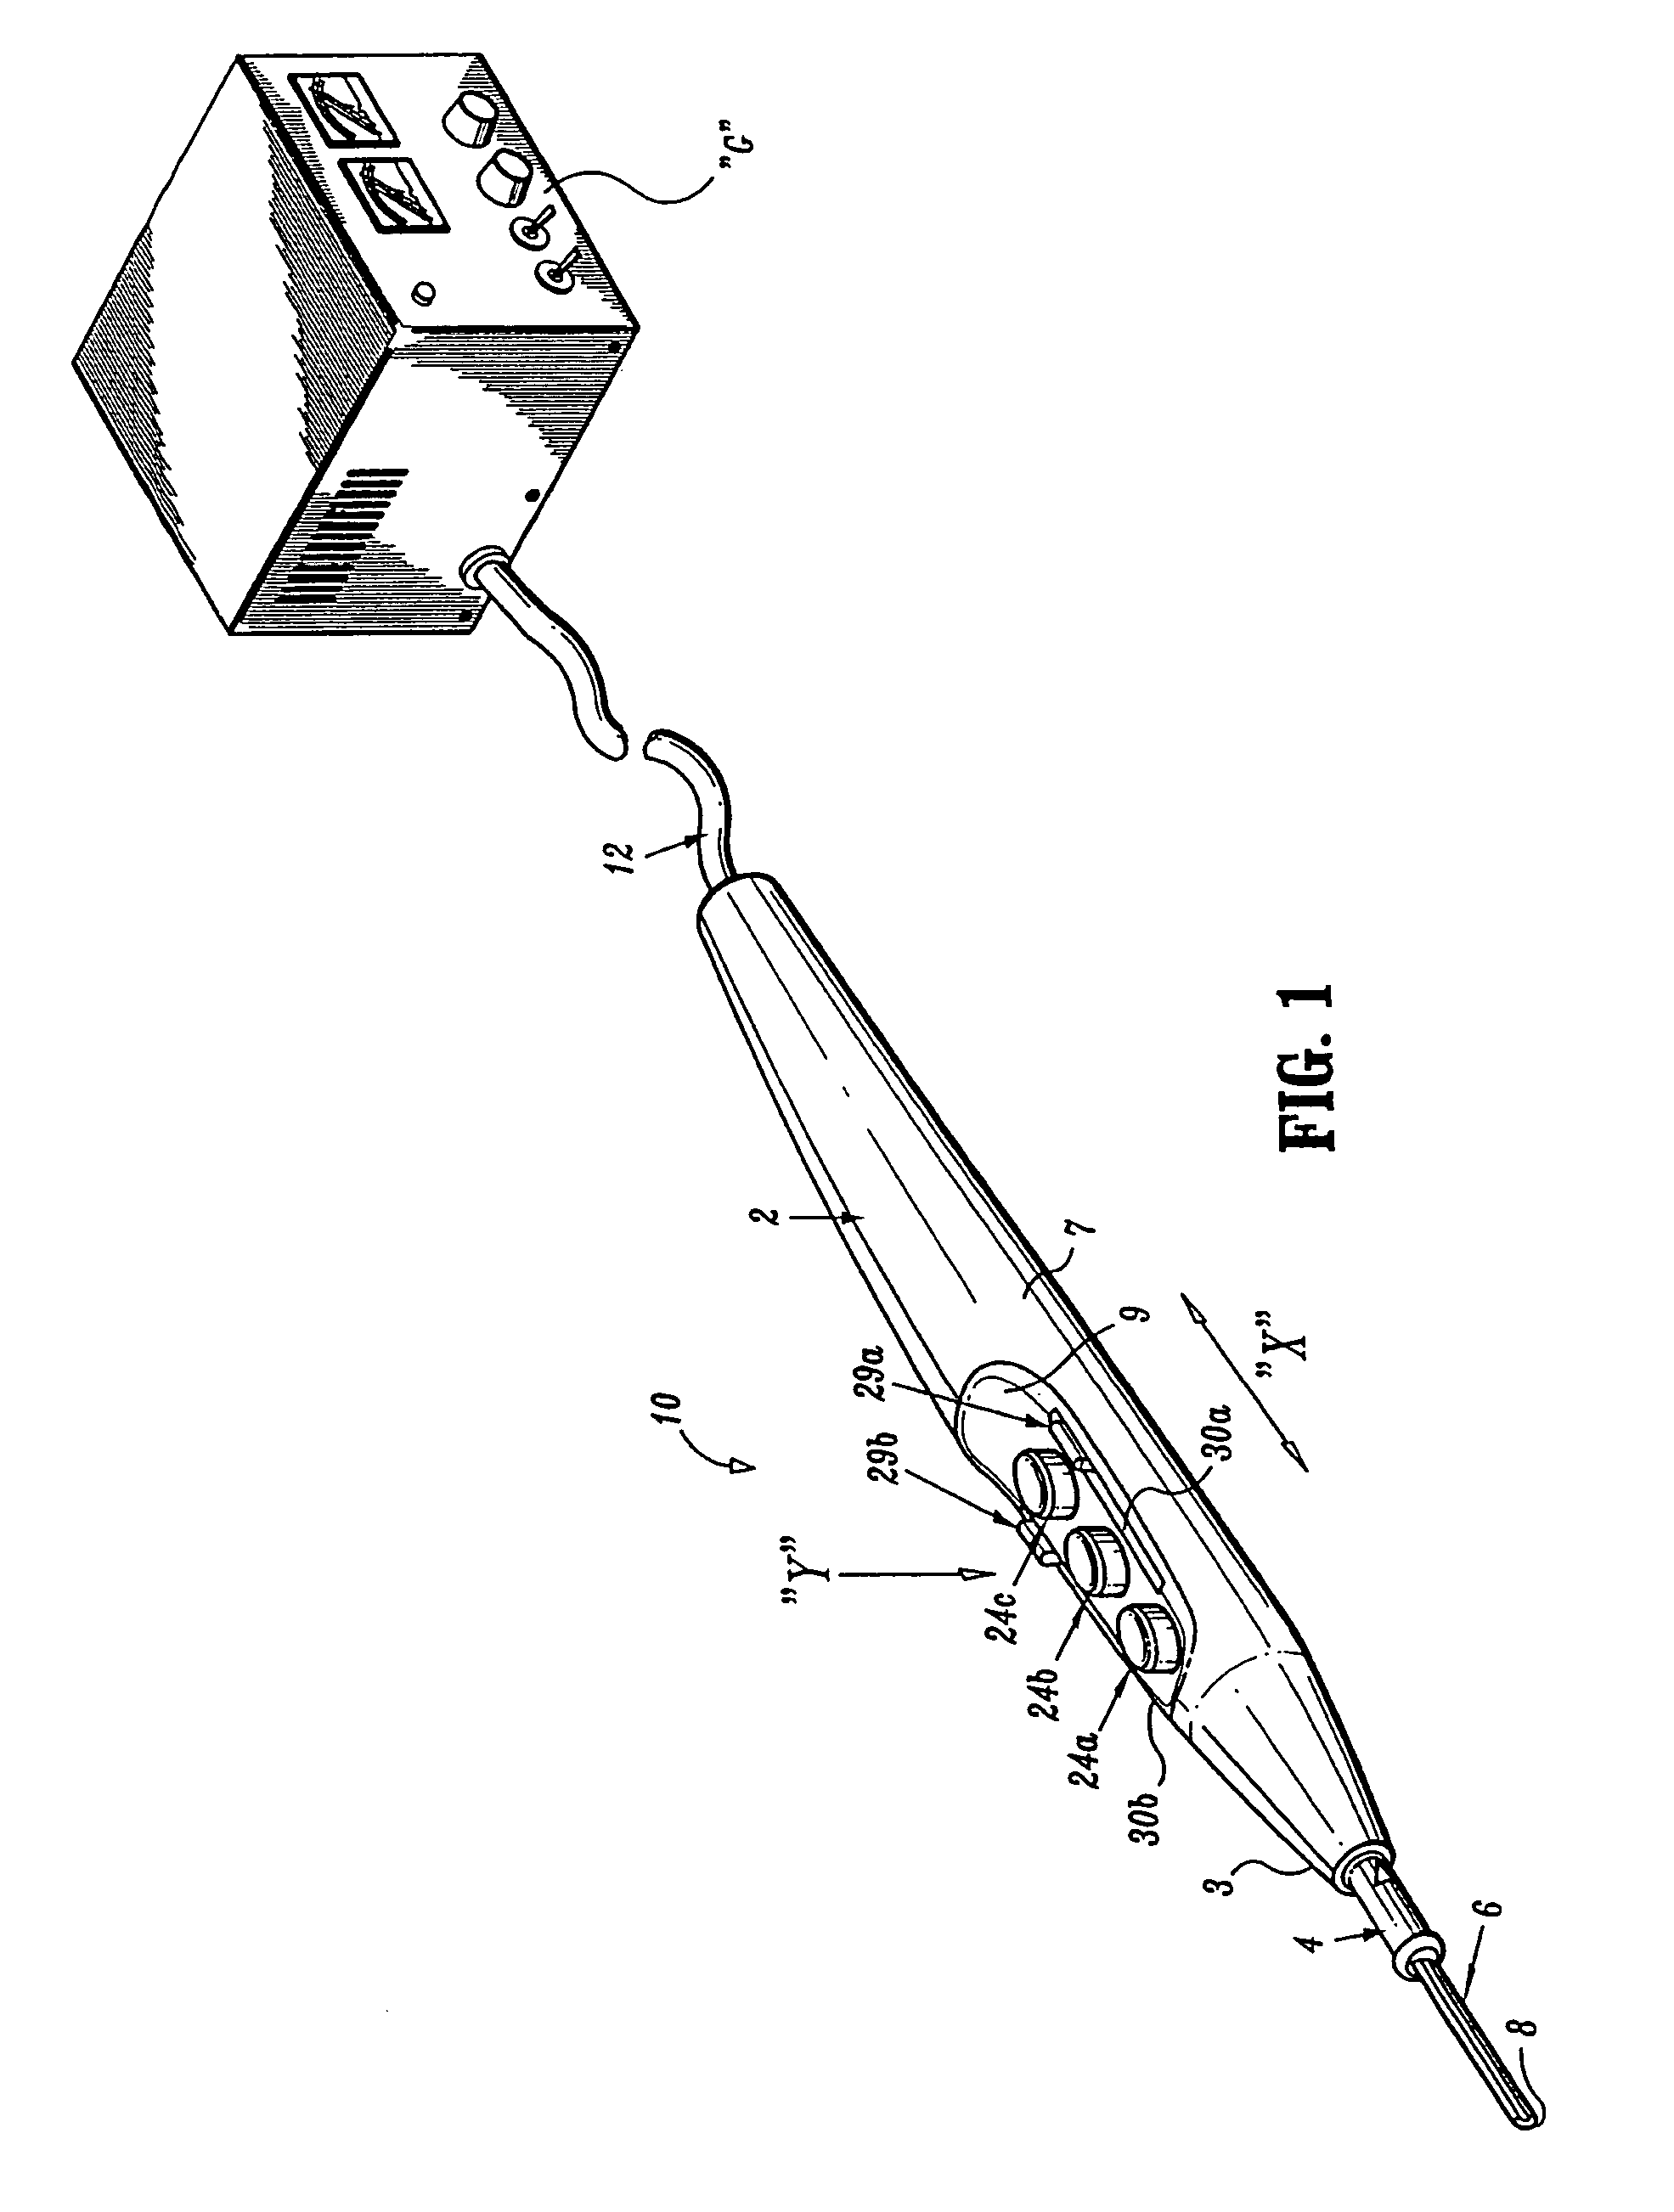 Electrosurgical pencil with improved controls